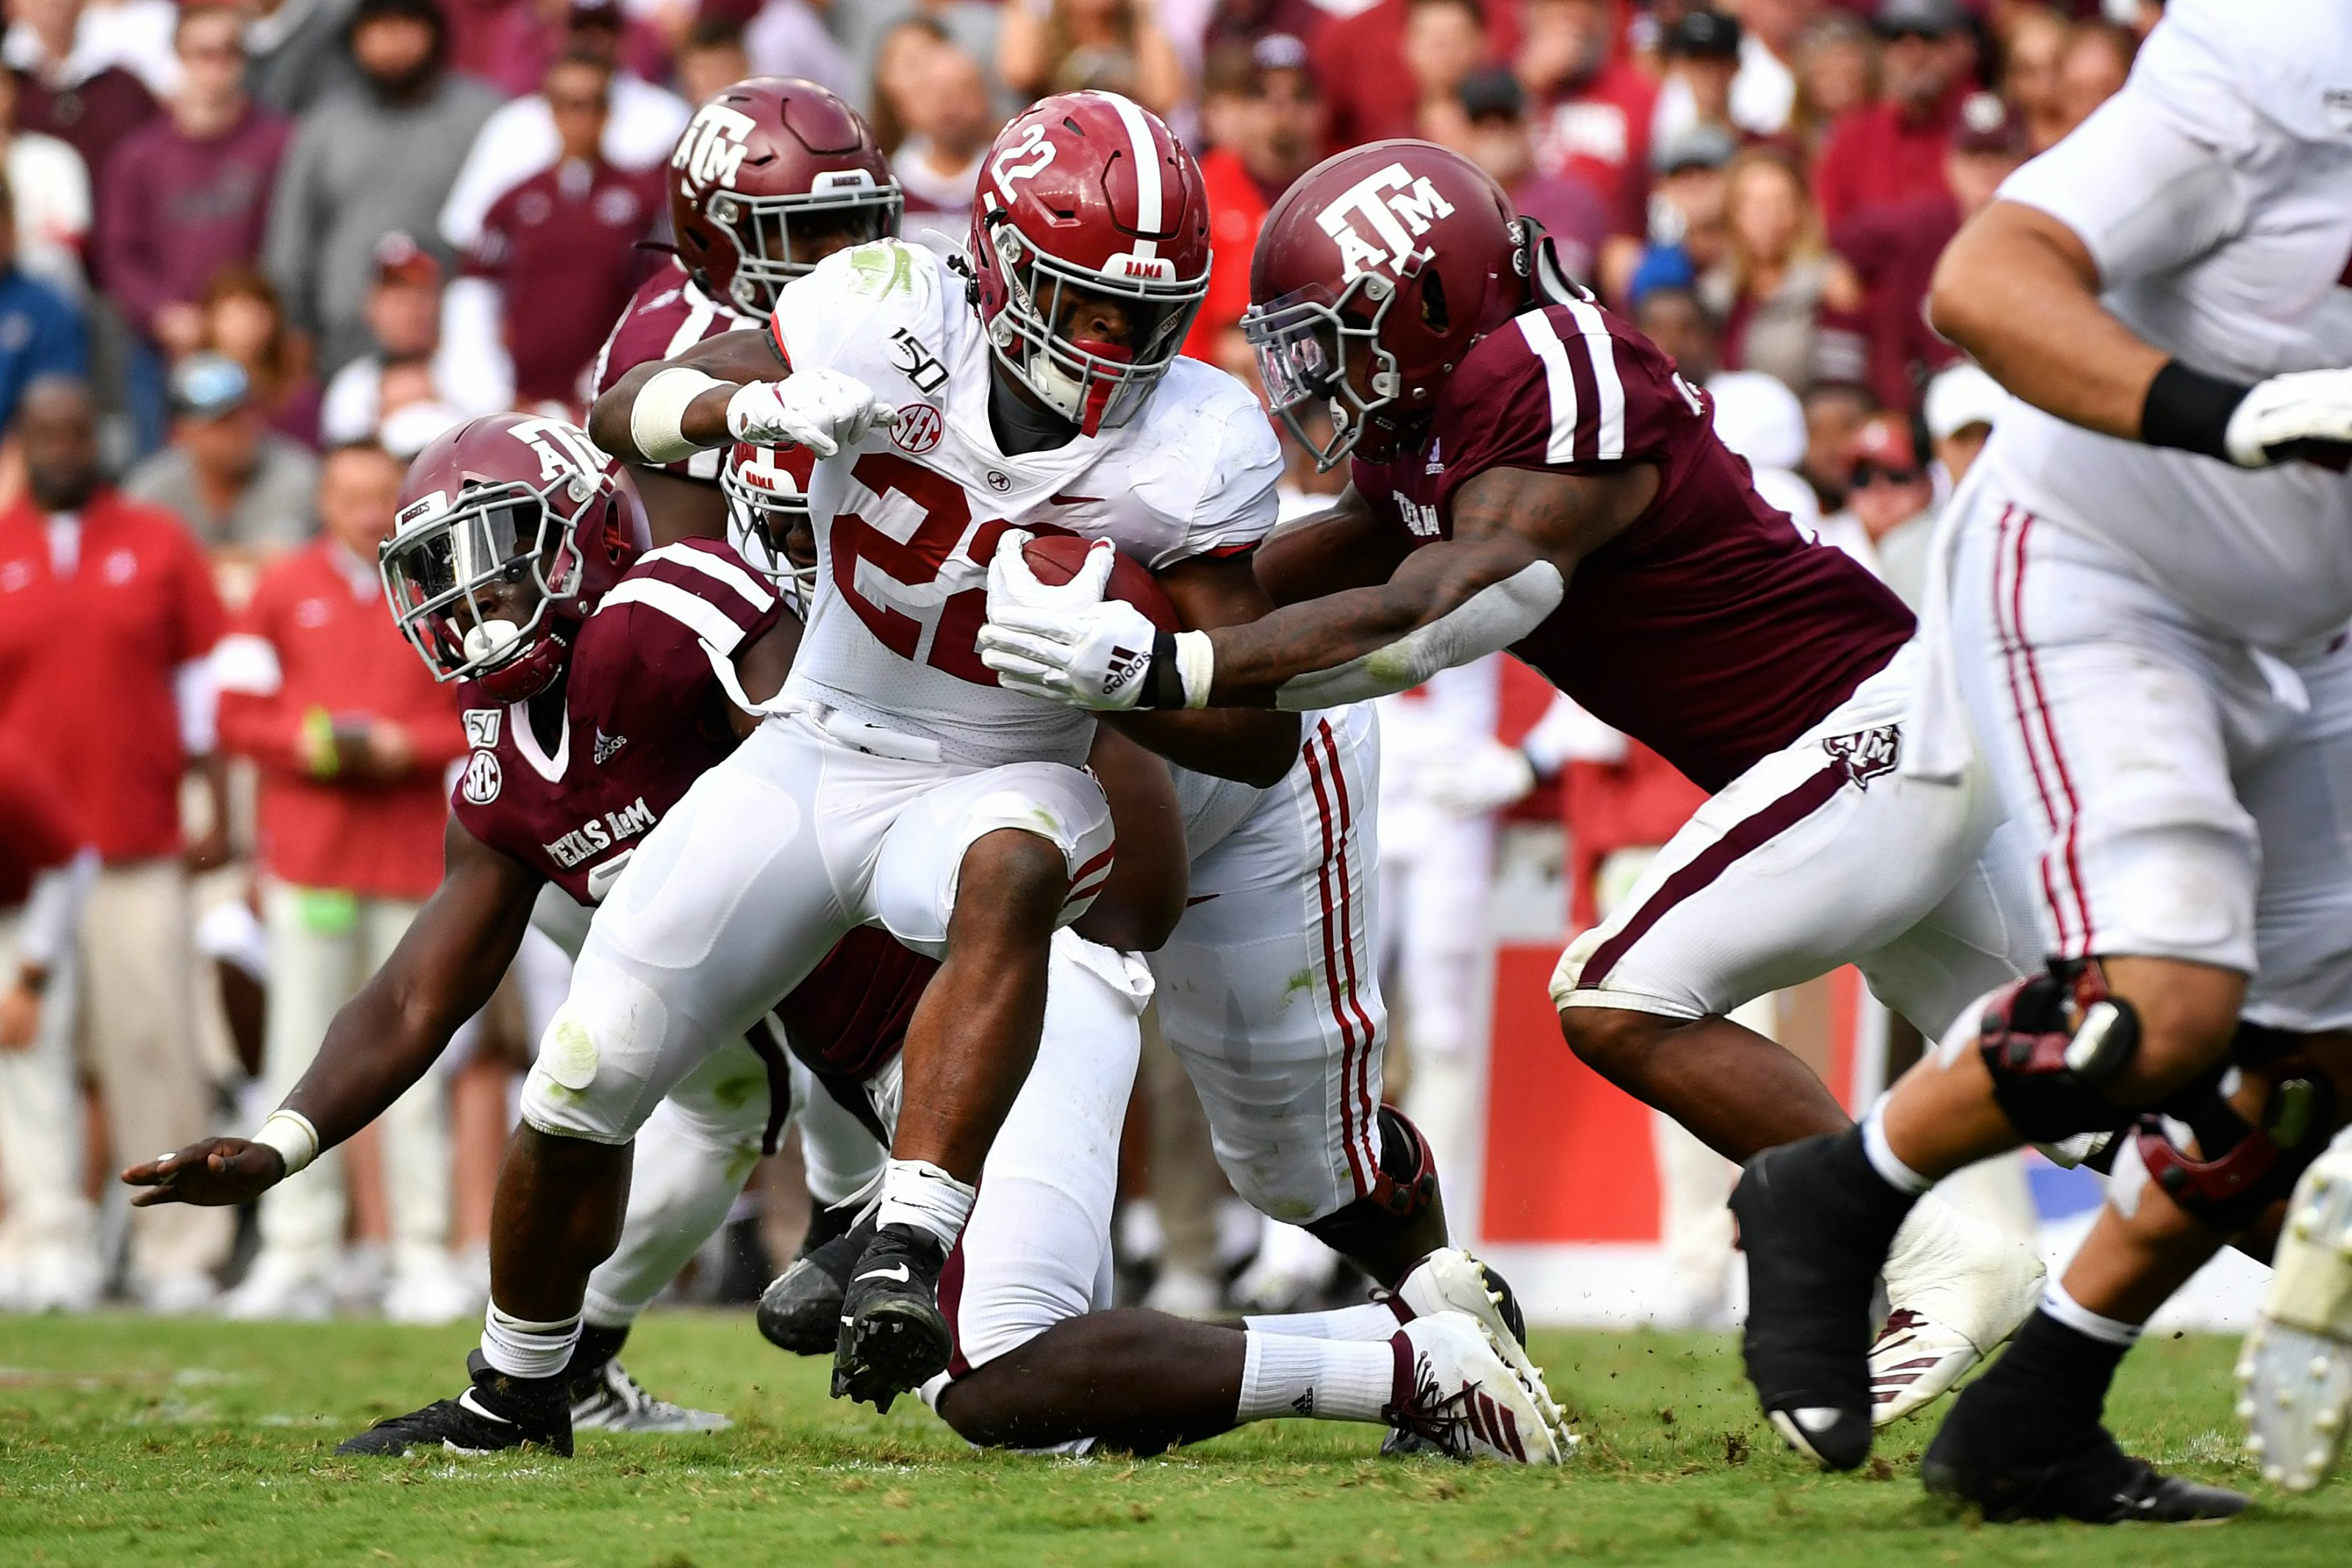 Alabama looks at the Texas A&M Football team as their toughest challenge